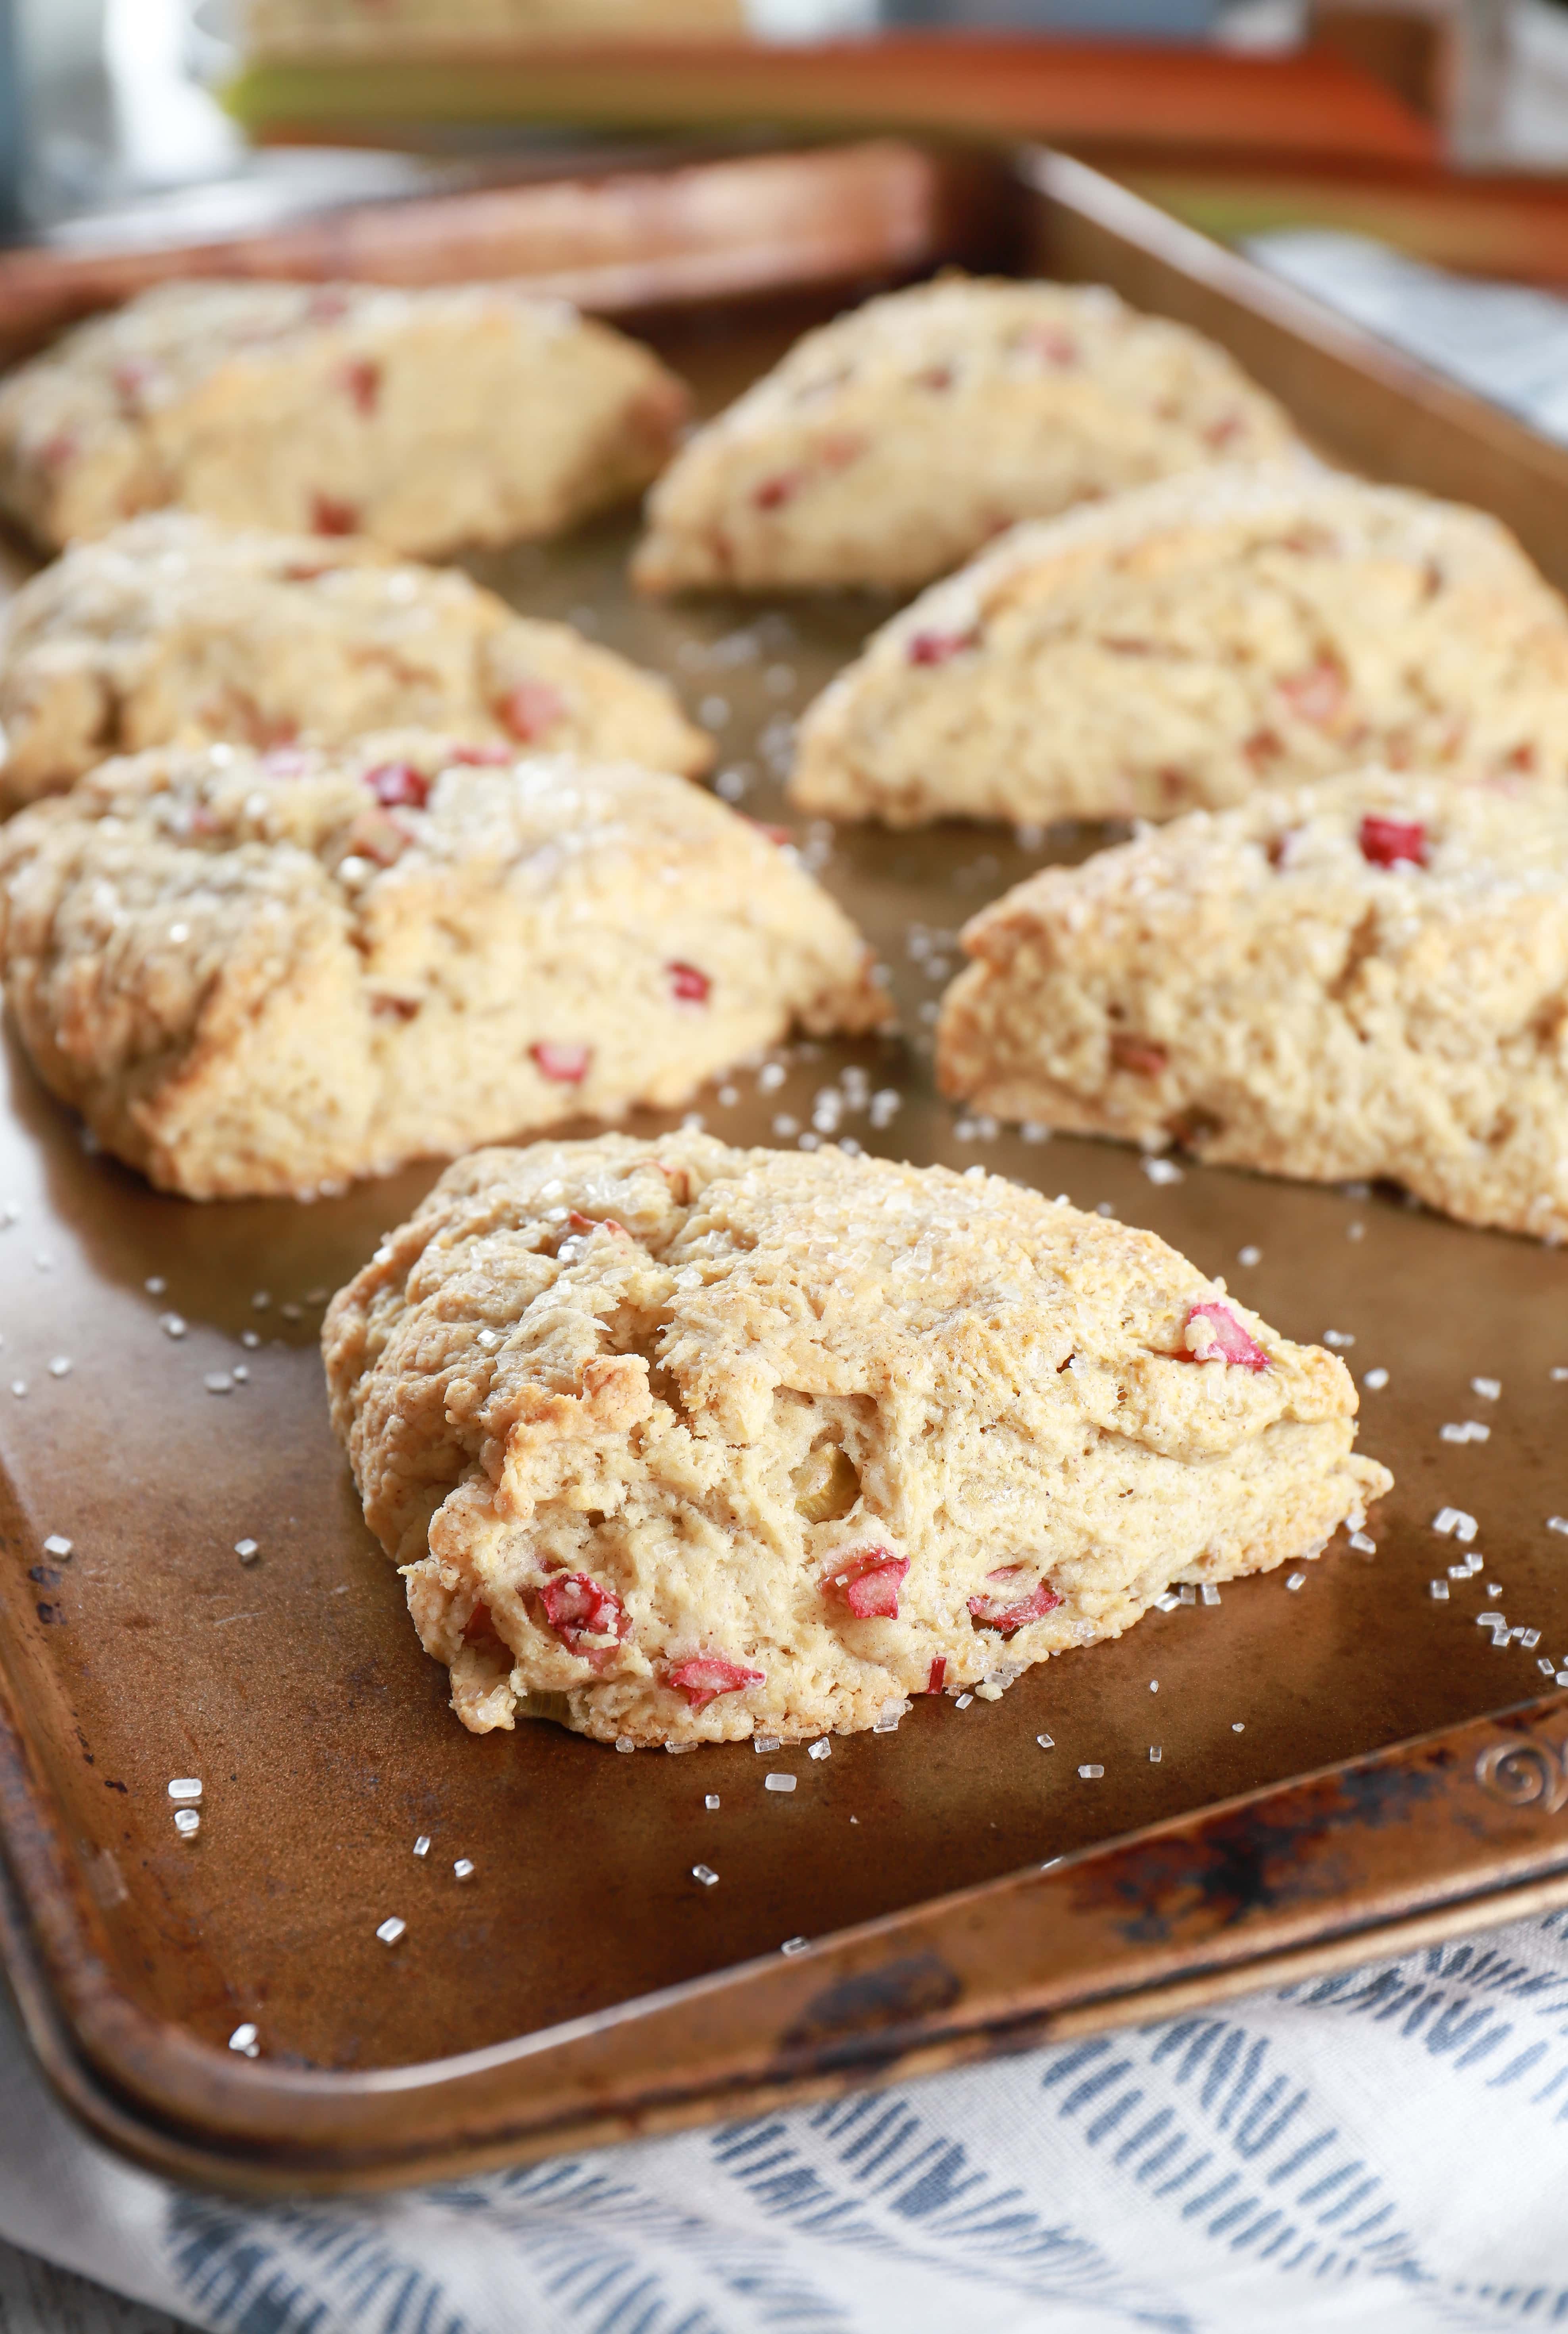 Rhubarb scones on a baking sheet with stalks of rhubarb in the background. Recipe from A Kitchen Addiction